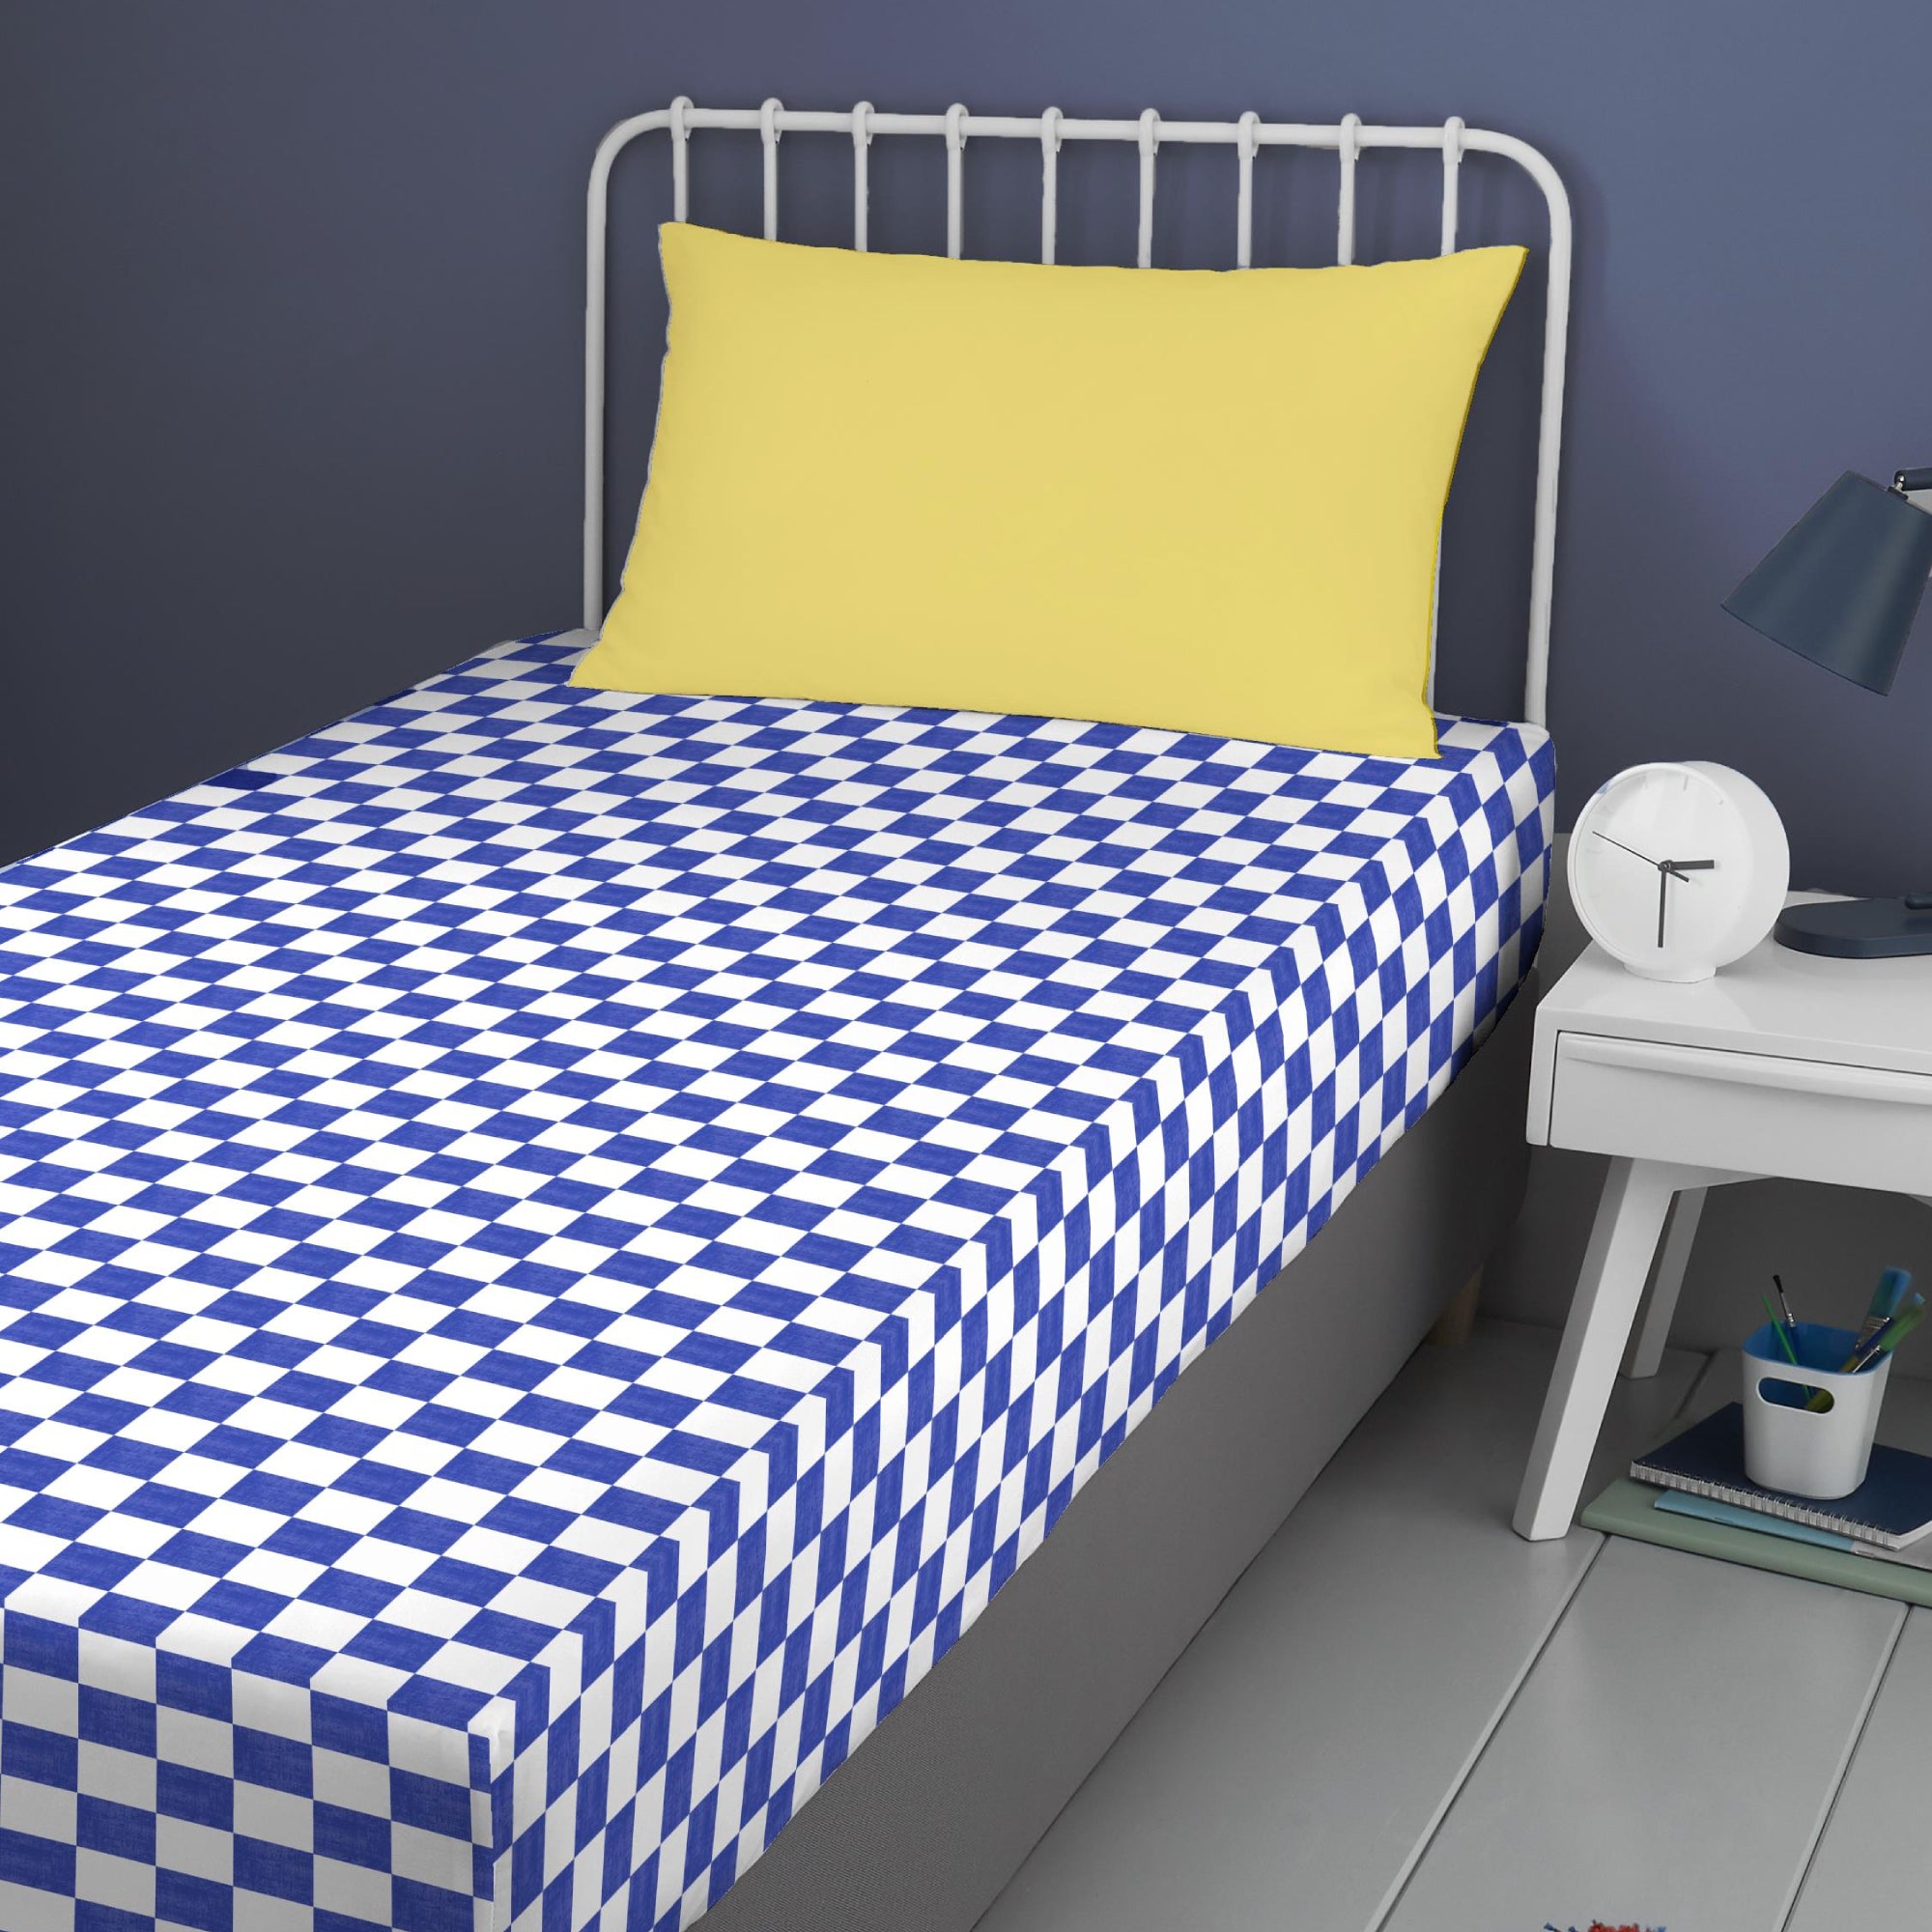 25cm Fitted Bed Sheet Beckett Stripe by Bedlam in Multi